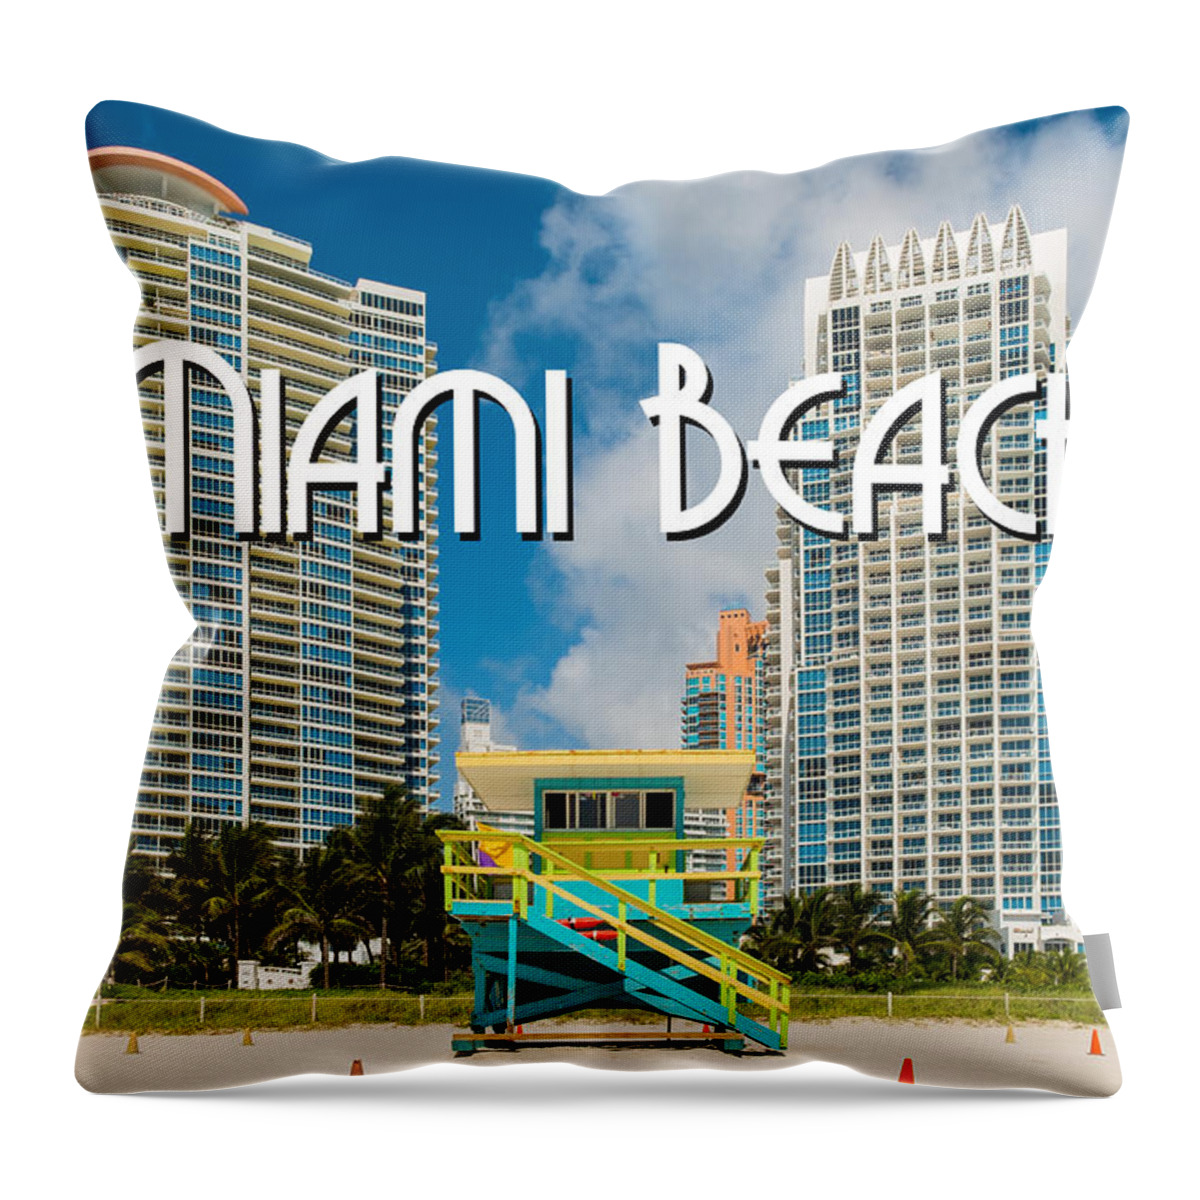 Architecture Throw Pillow featuring the photograph South Beach by Raul Rodriguez